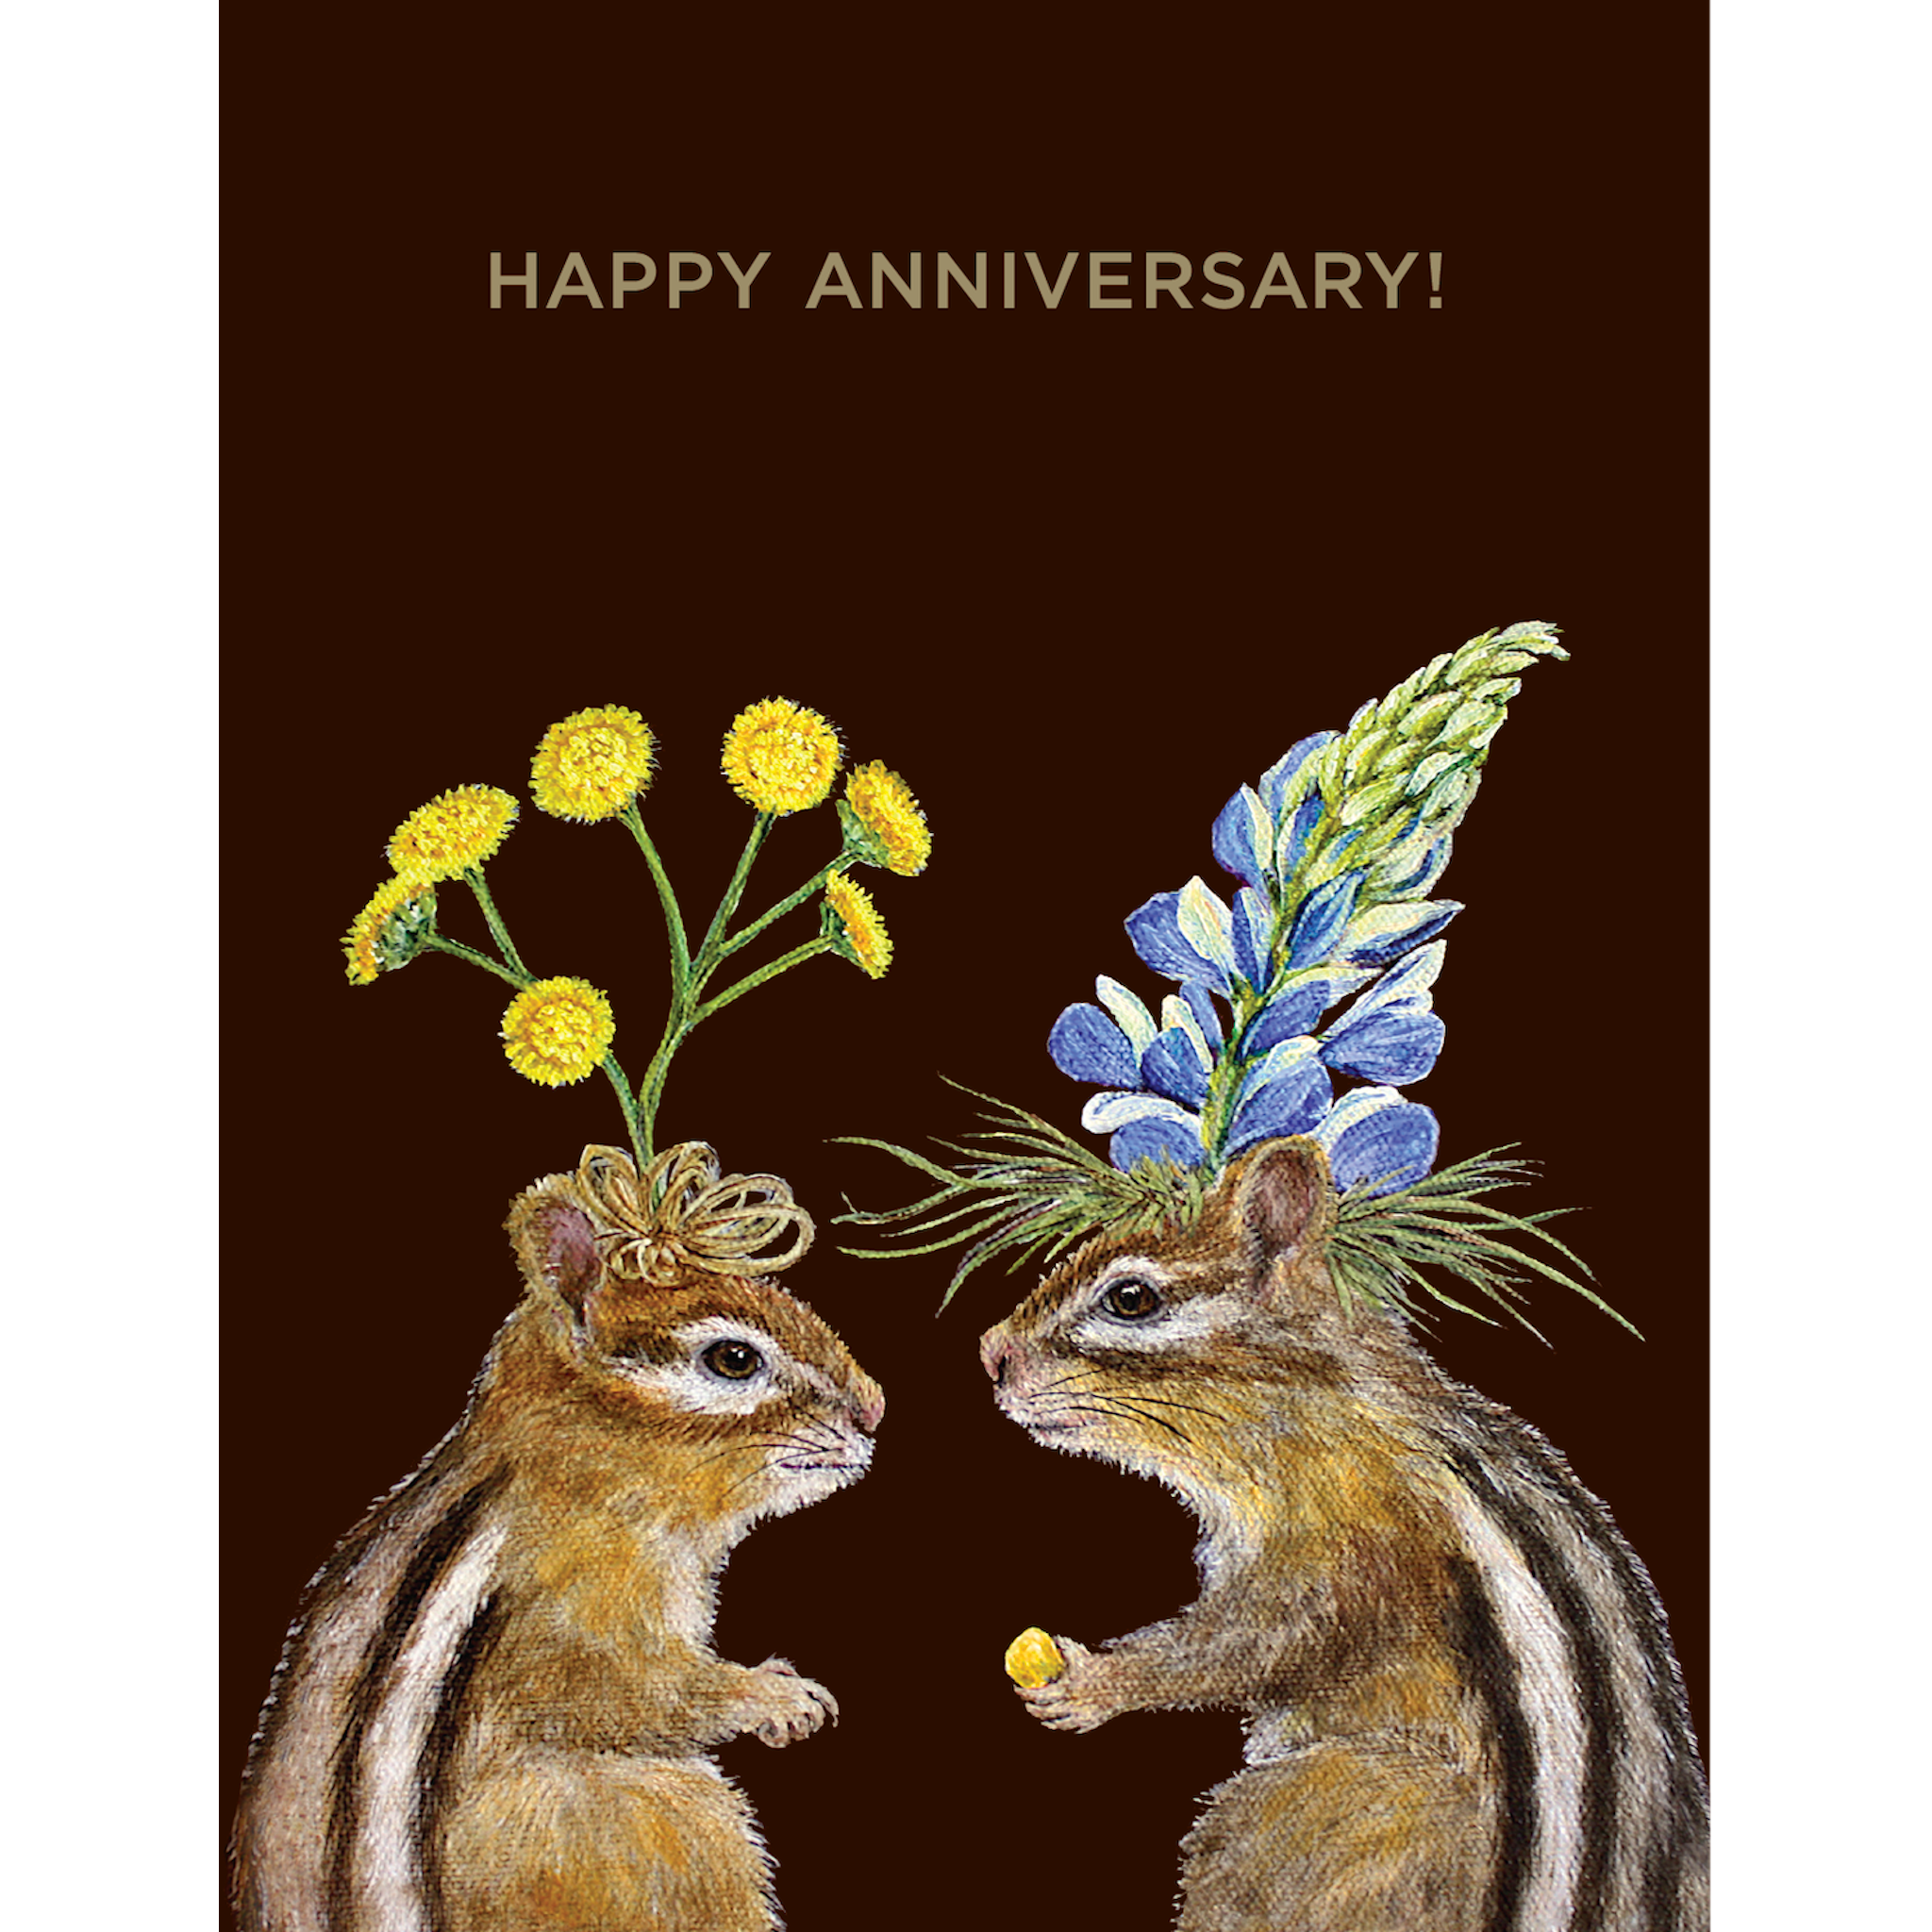 Two Hester &amp; Cook chipmunks with flowers on their heads, perfect for an Anniversary Chipmunks Card, set against a warm brown background.